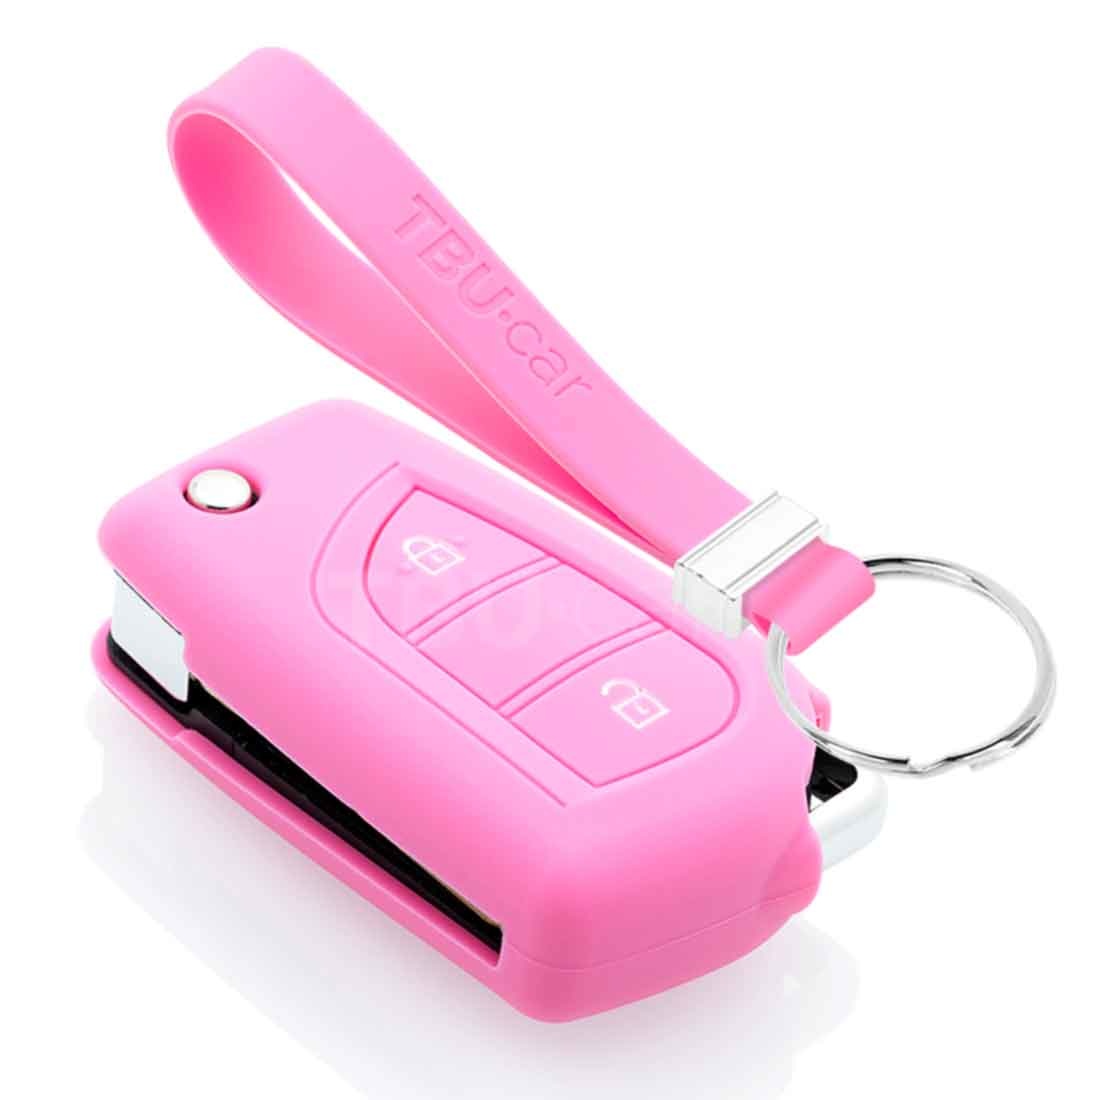 TBU car TBU car Car key cover compatible with Peugeot - Silicone Protective Remote Key Shell - FOB Case Cover - Pink